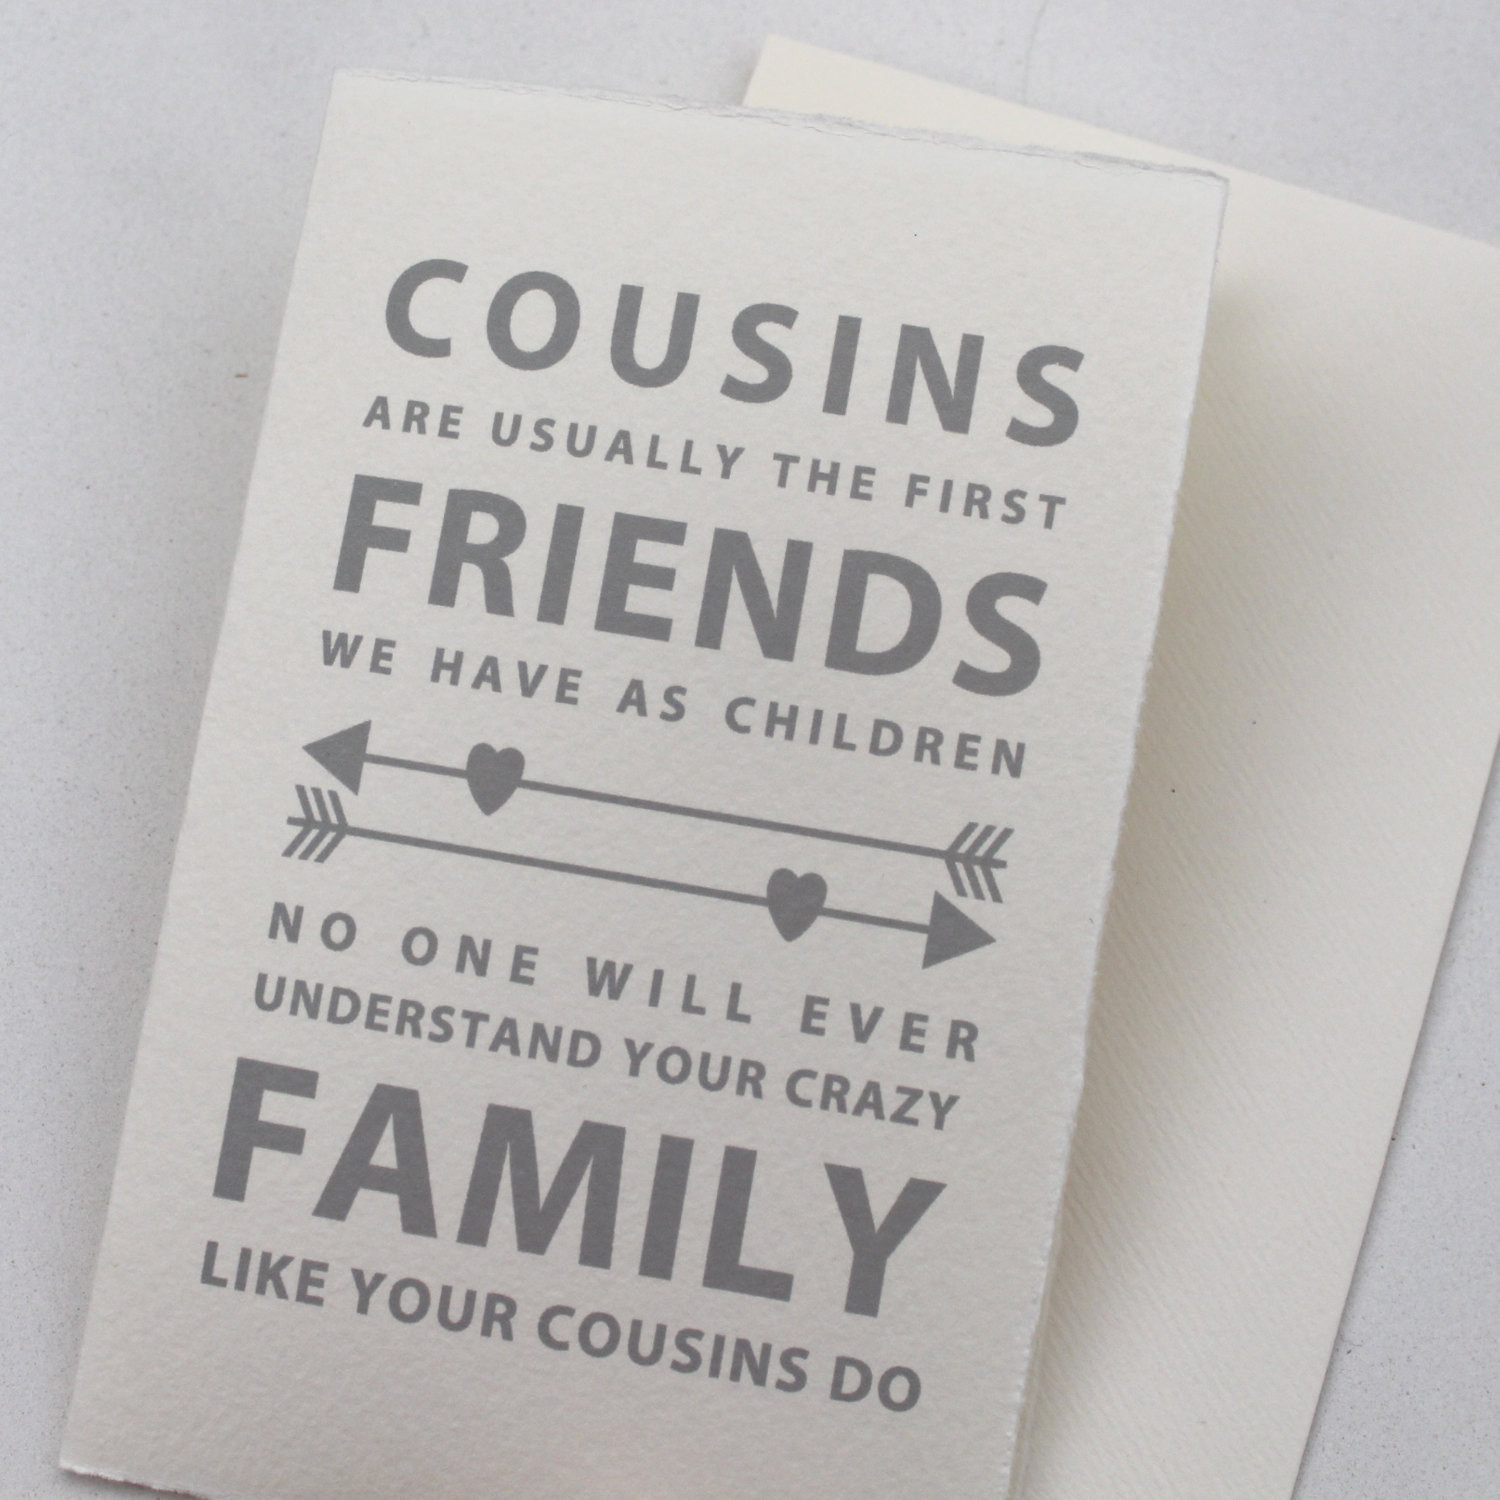 Cousin Family Quotes
 Cousin Card Cousins are usually the first friends we